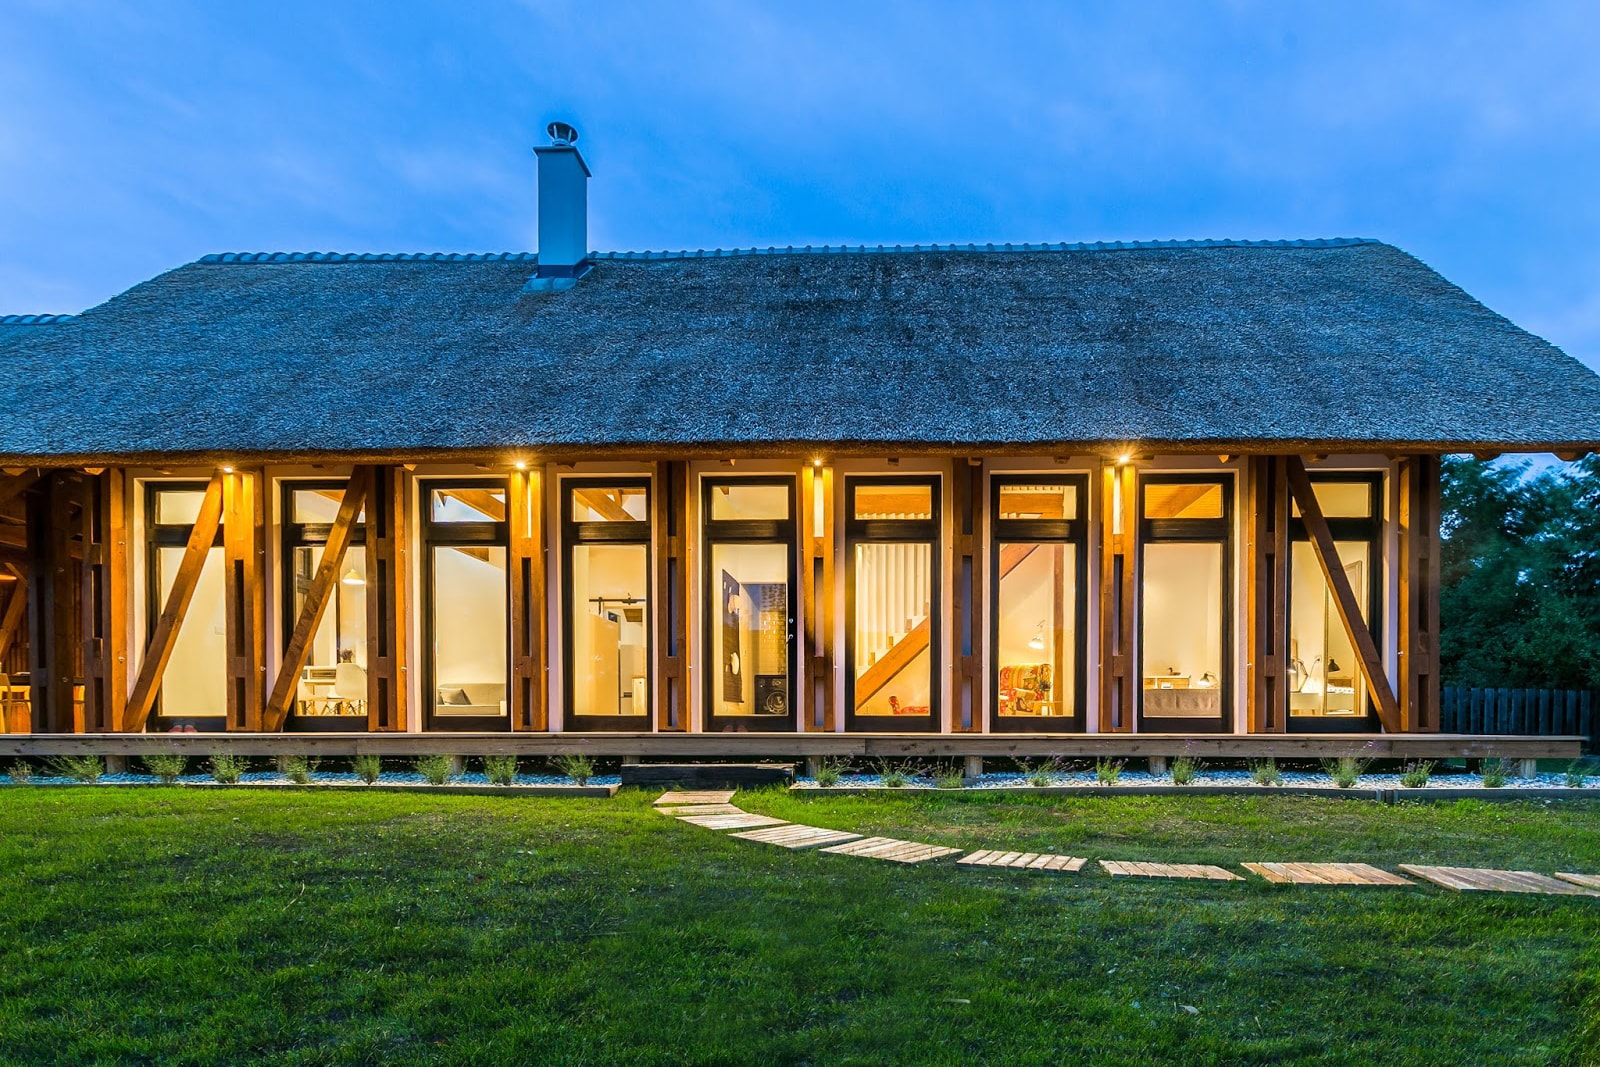 Portushome Guesthouse Barna Architects Dörgicse Hungary Houses Modern Wooden Interior Exterior